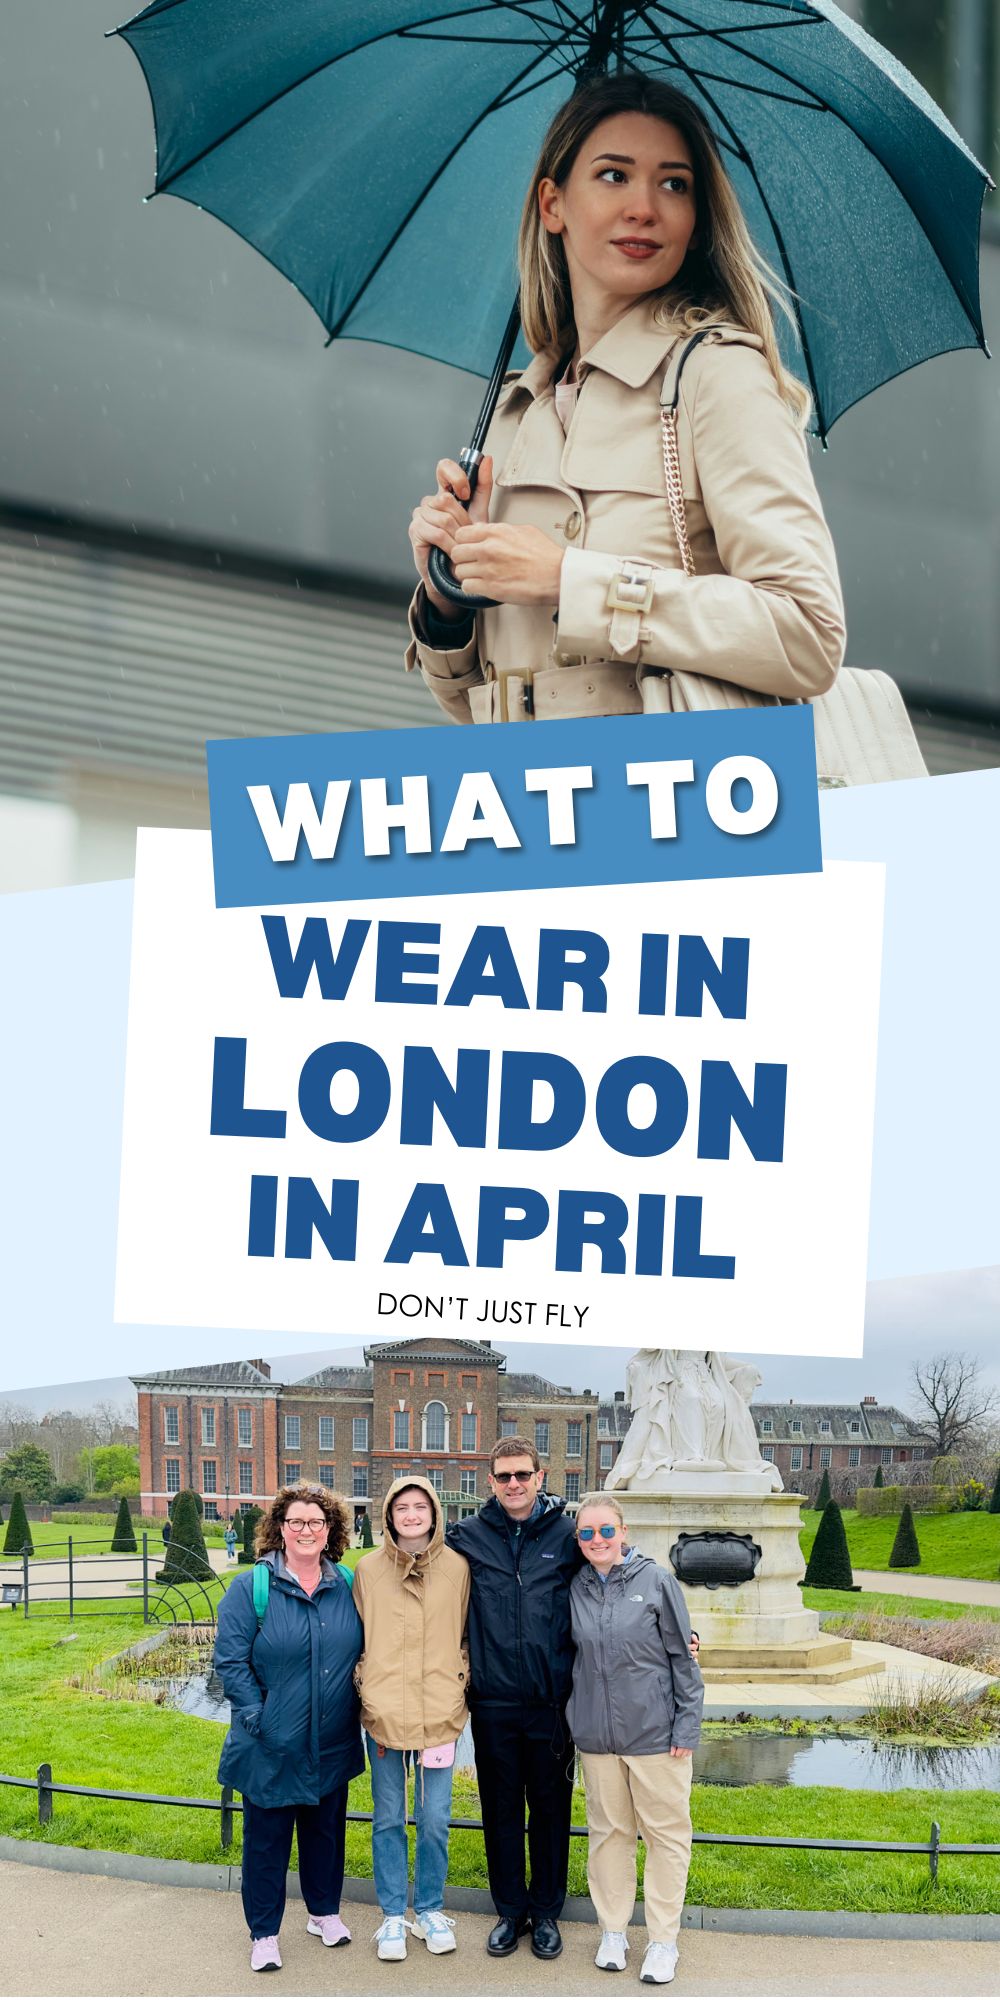 The photo collage shows several outfits to wear in London.